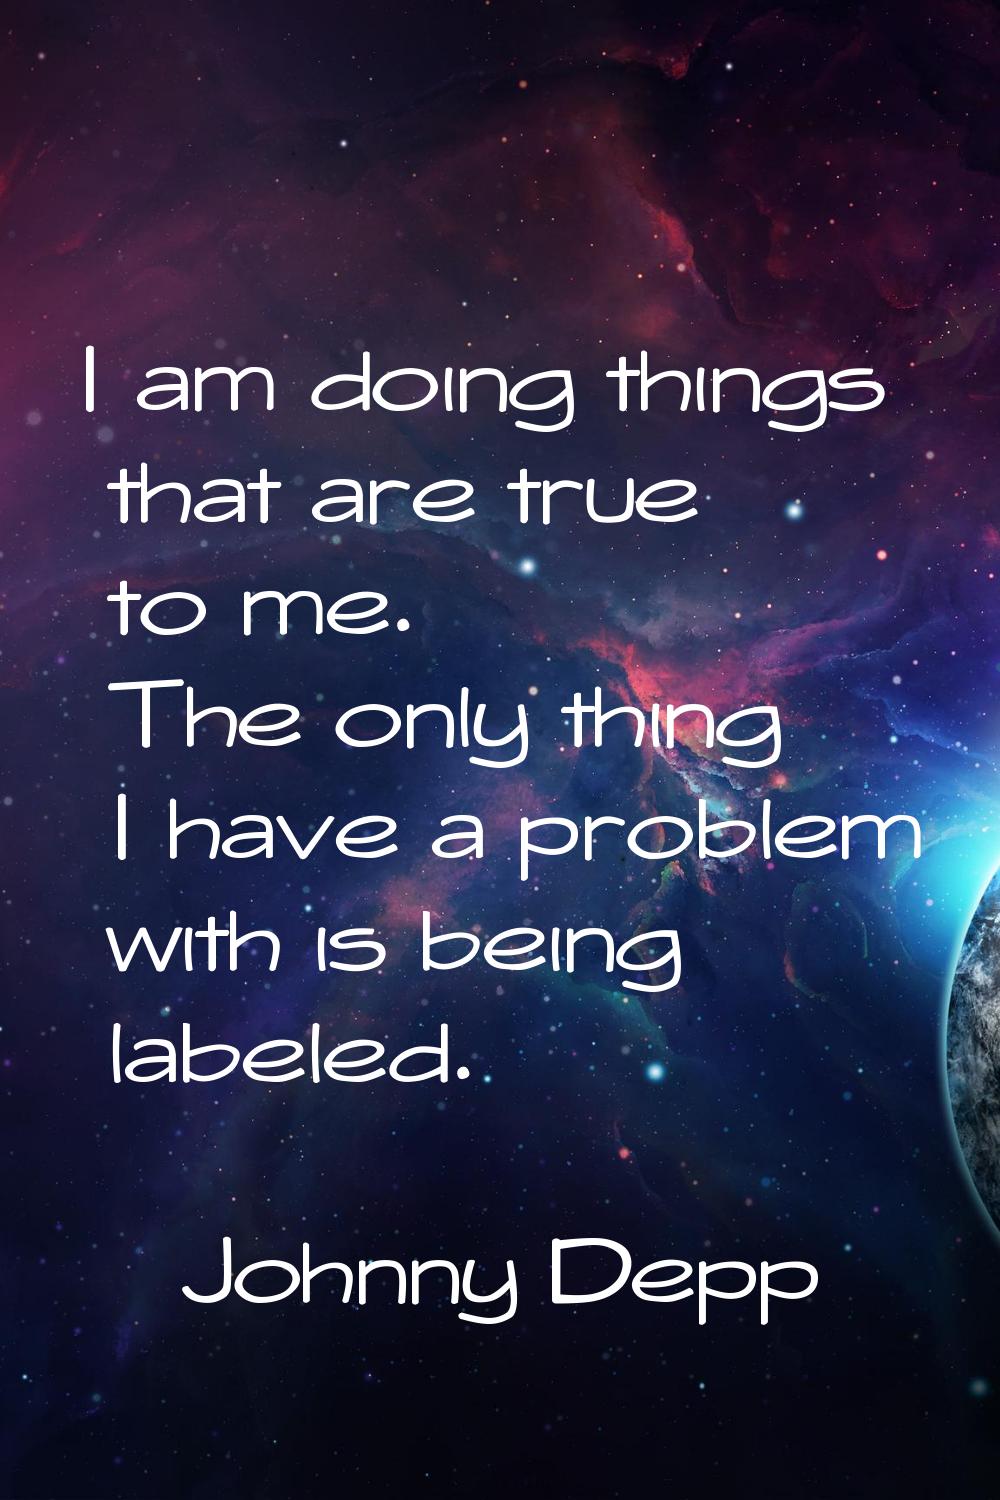 I am doing things that are true to me. The only thing I have a problem with is being labeled.